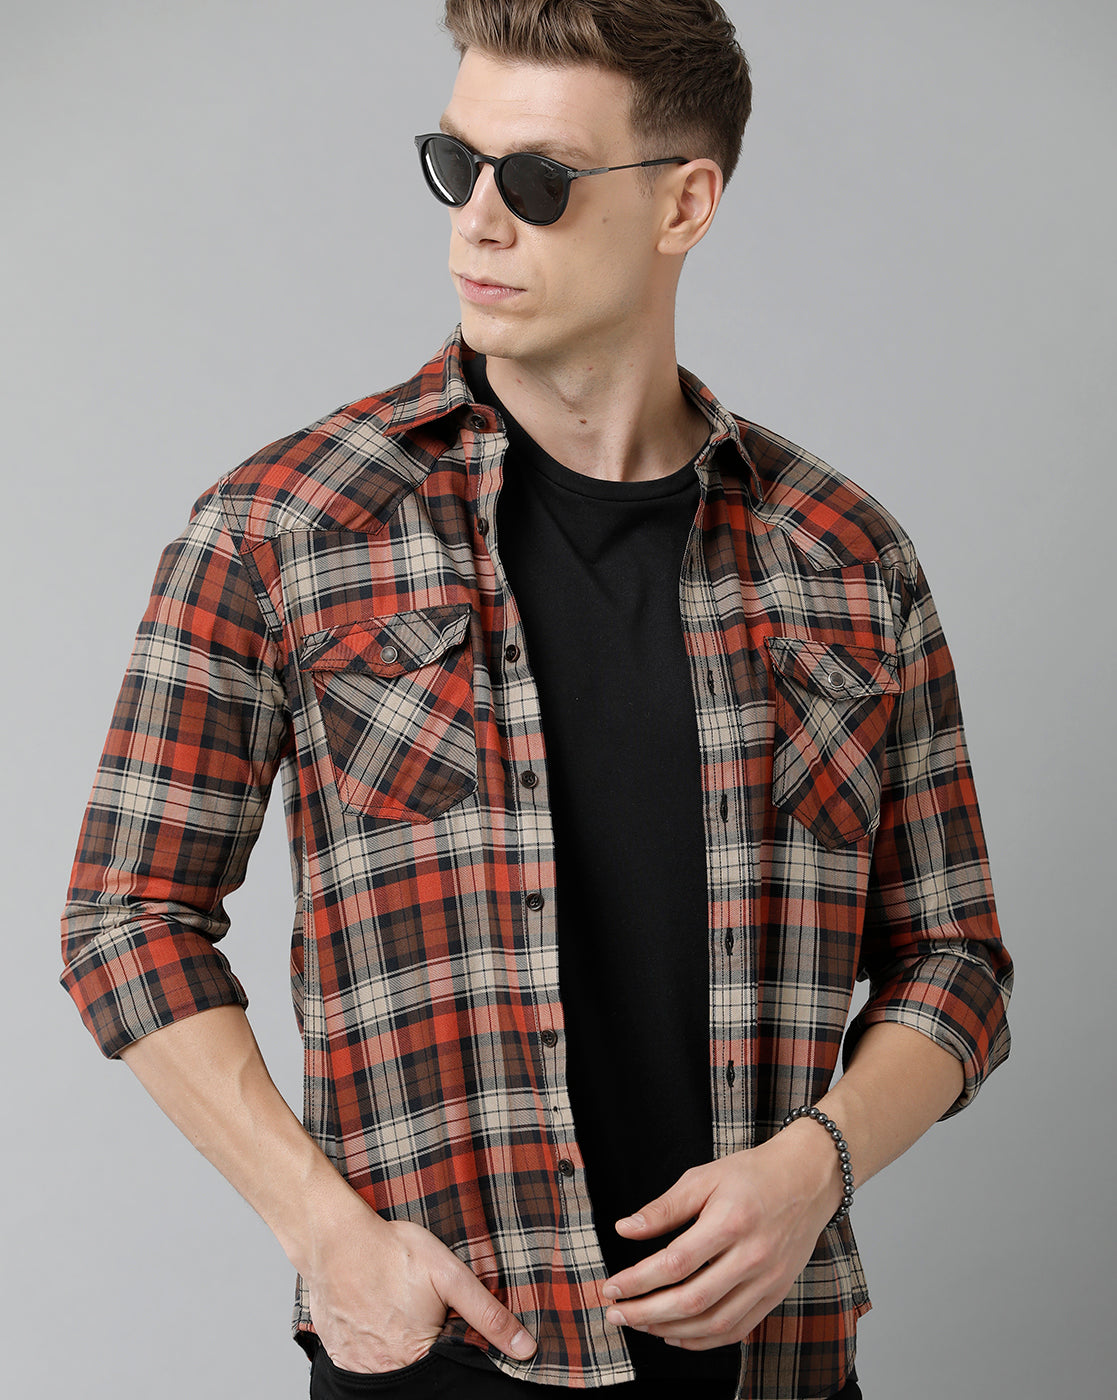 Red and black check shirt